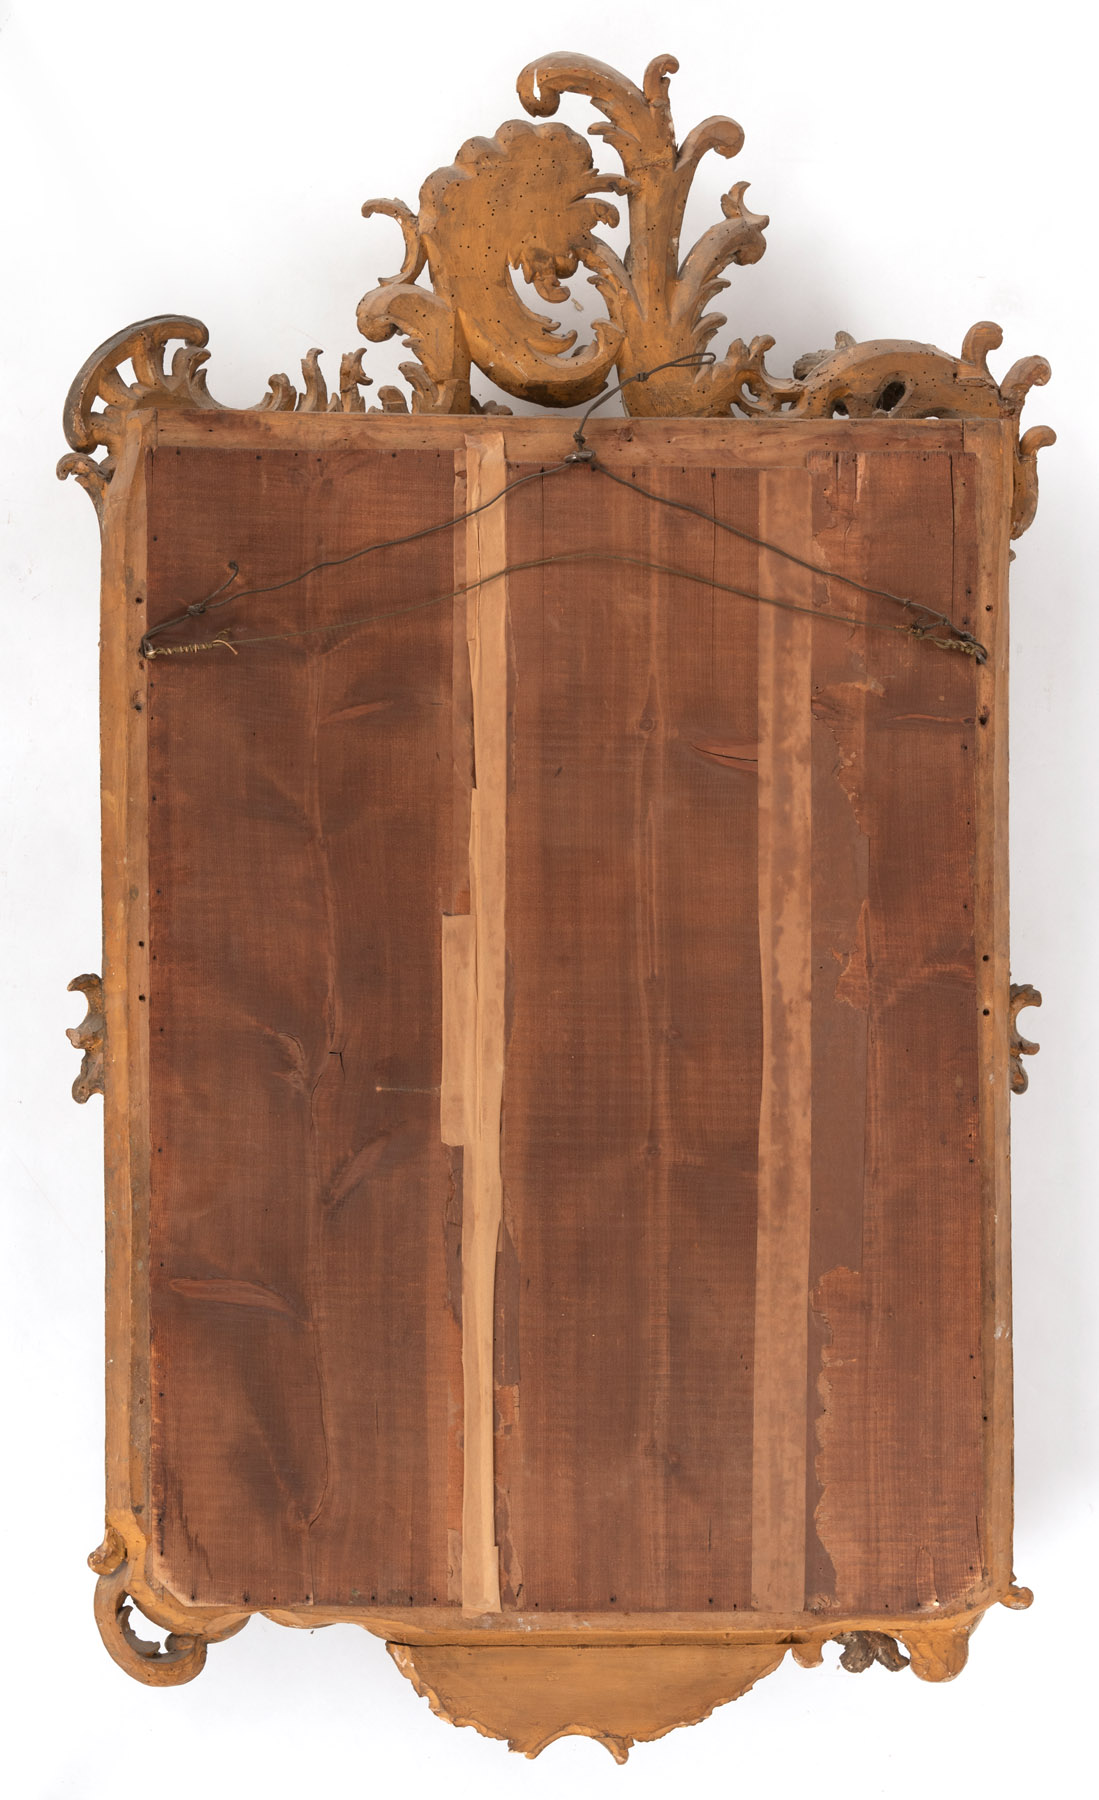 A SOUTH GERMAN CARVED AND PAINTED WOOD ROCOCO MIRROR - Image 2 of 2